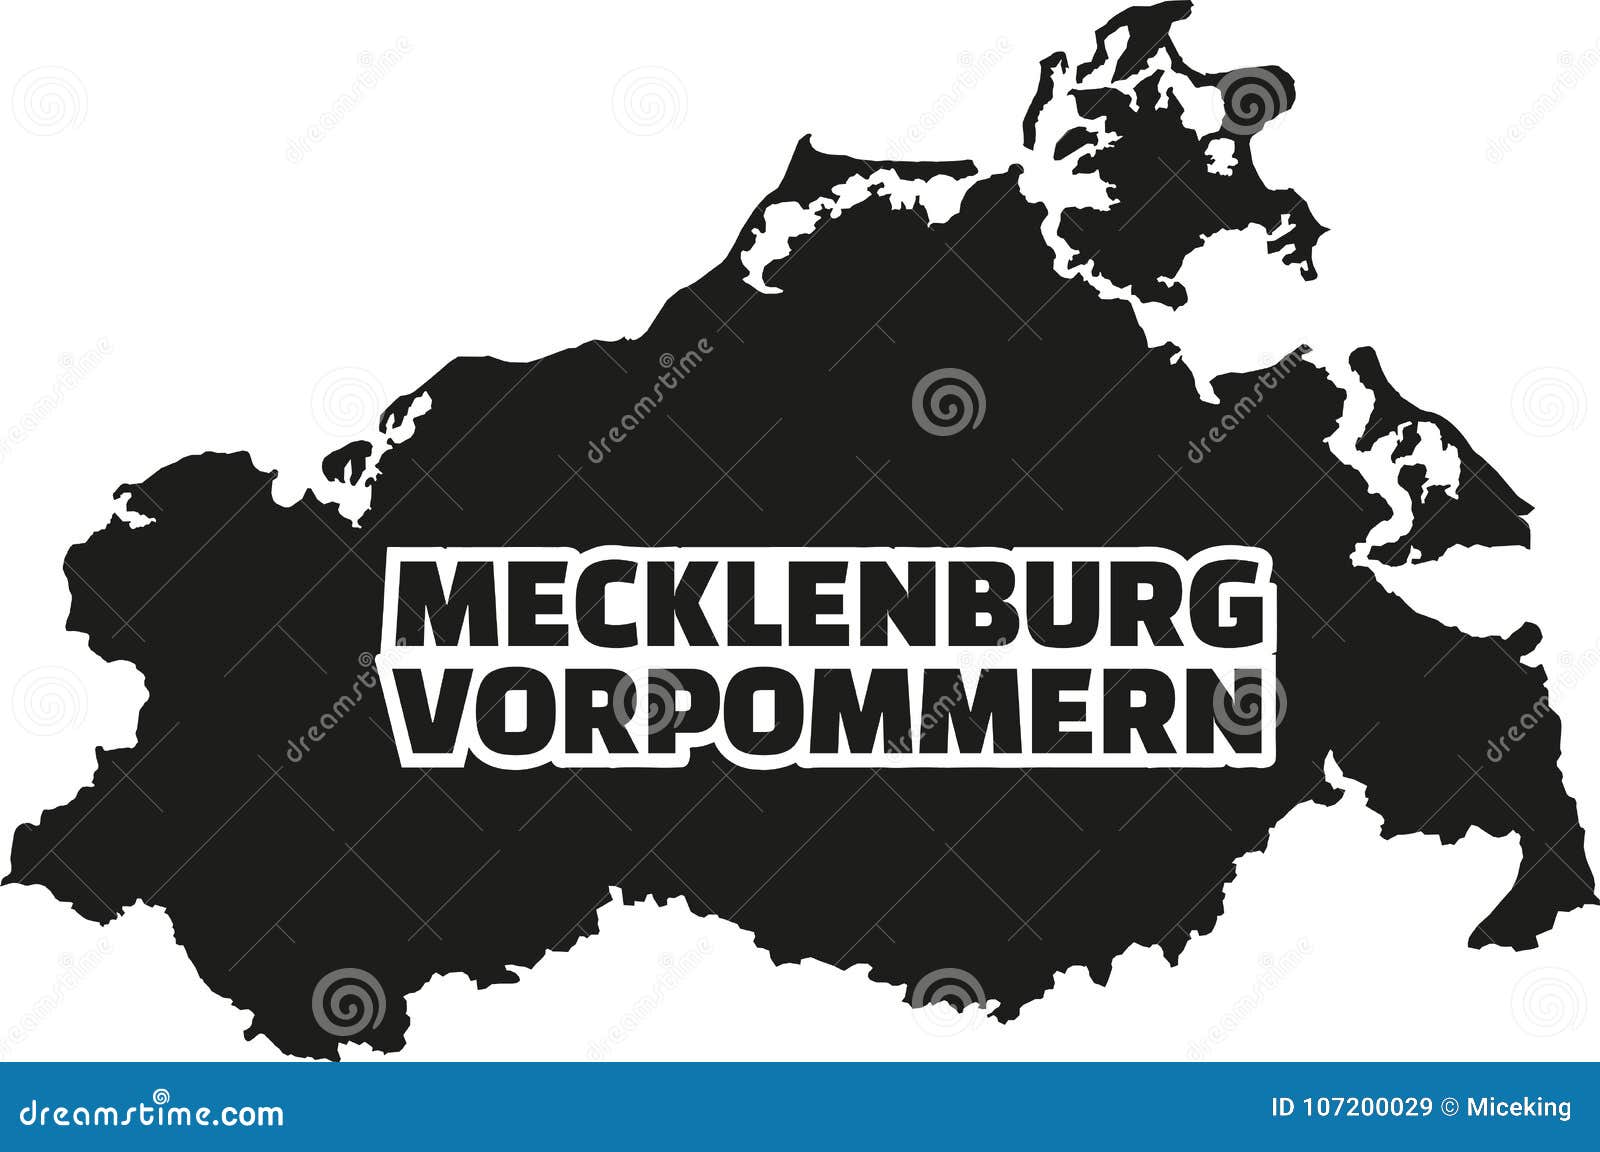 mecklenburg-western pomerania map with german title